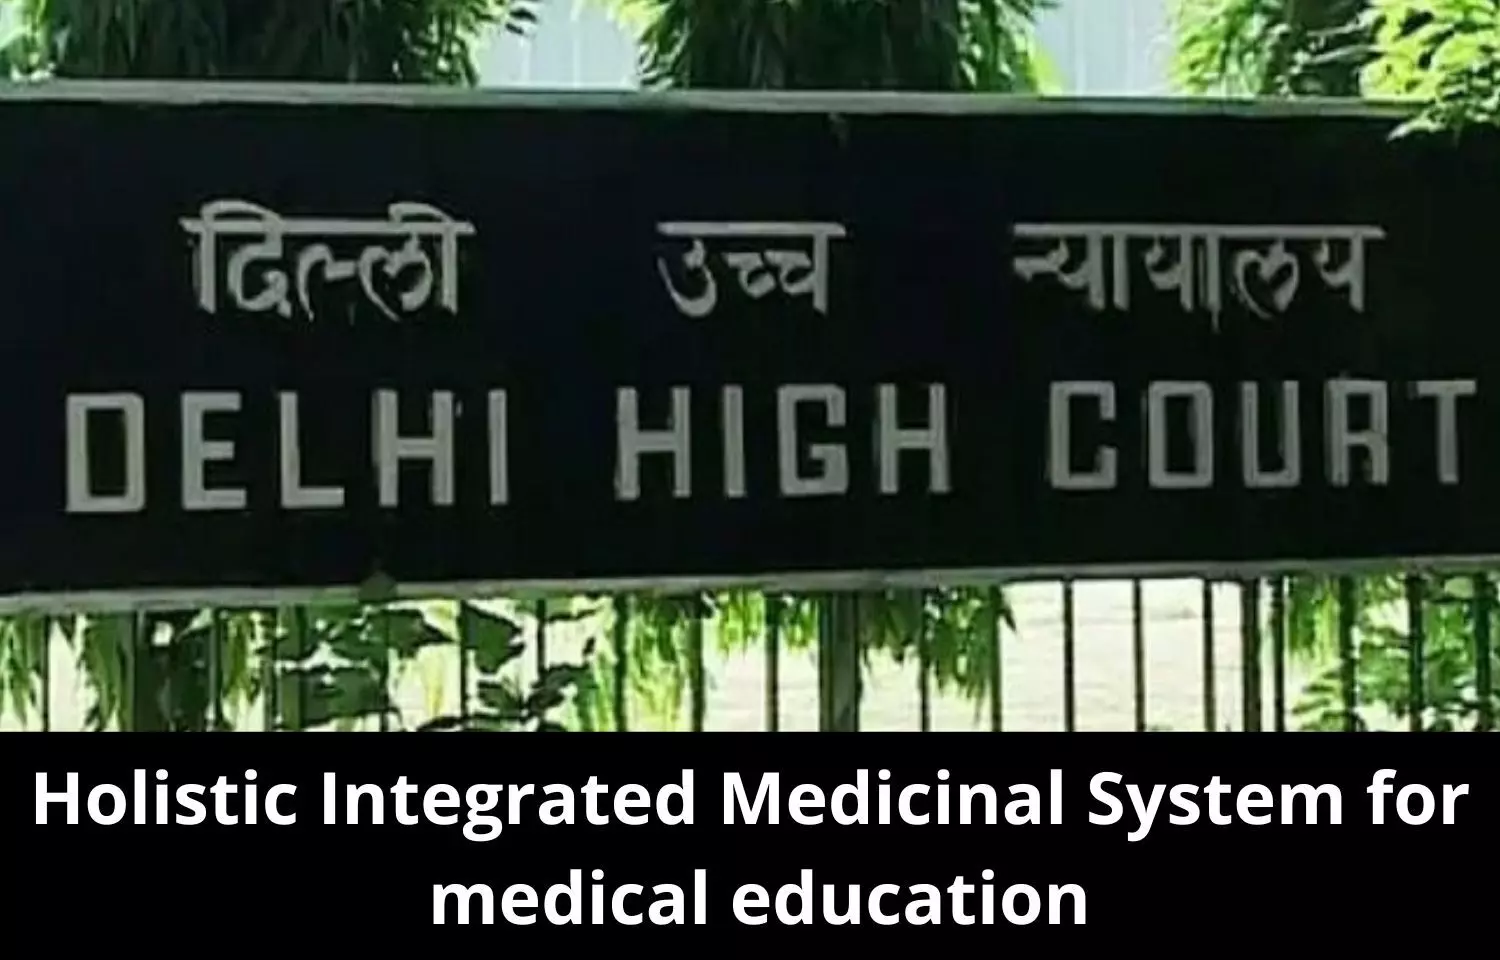 Patanjali moves to court supporting PIL seeking Holistic Integrated Medicinal System for medical education and treatment